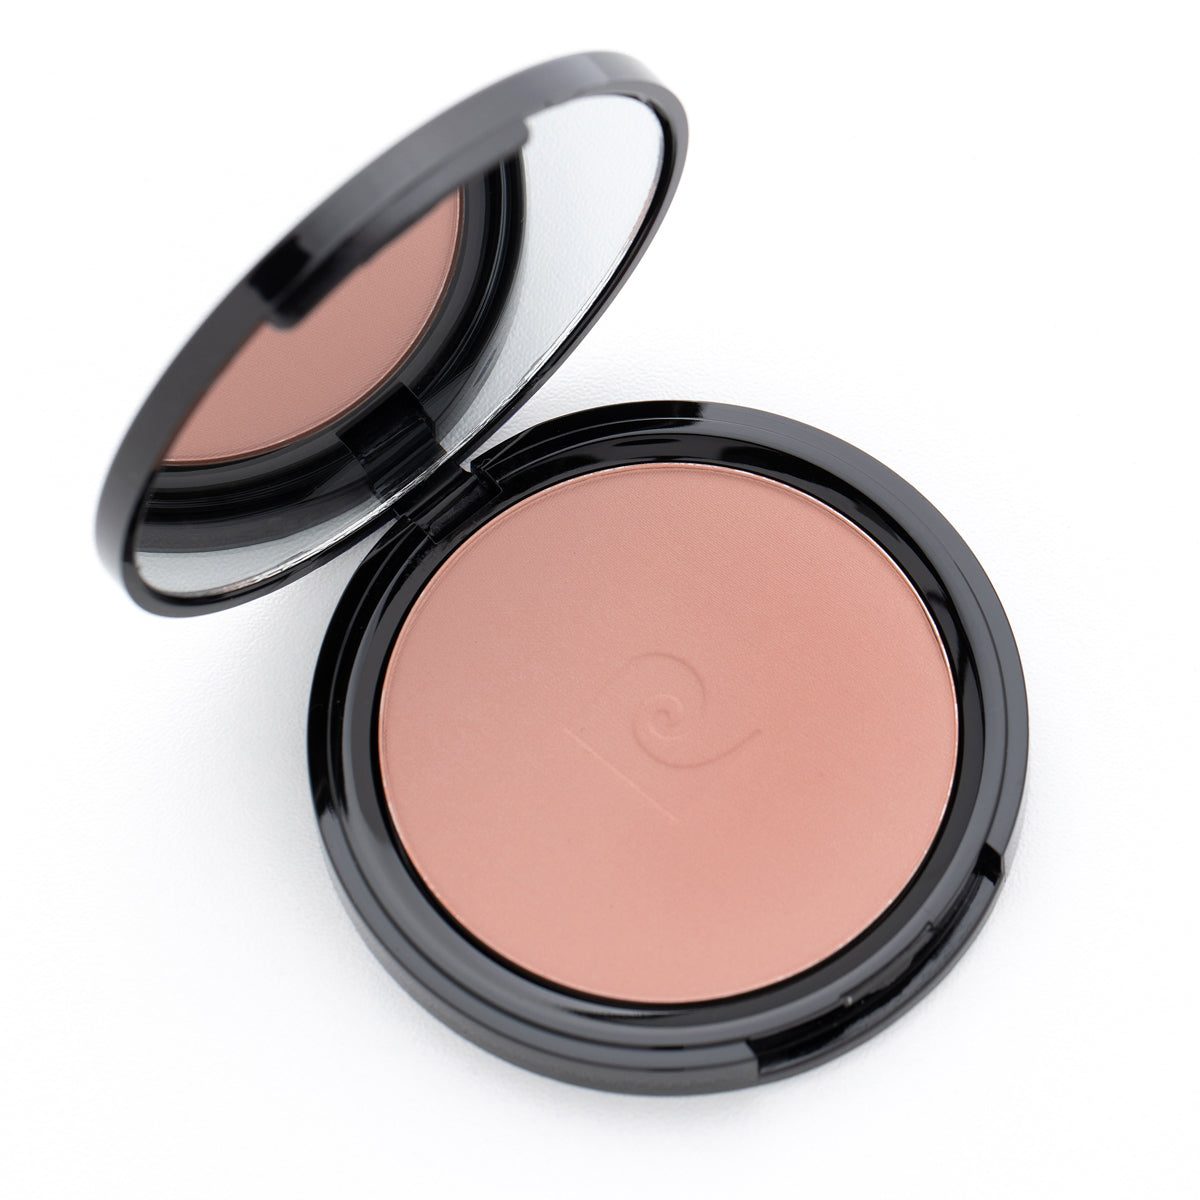 Pierre Cardin Porcelain Edition Blush On Cool Pink 560 - 13 g